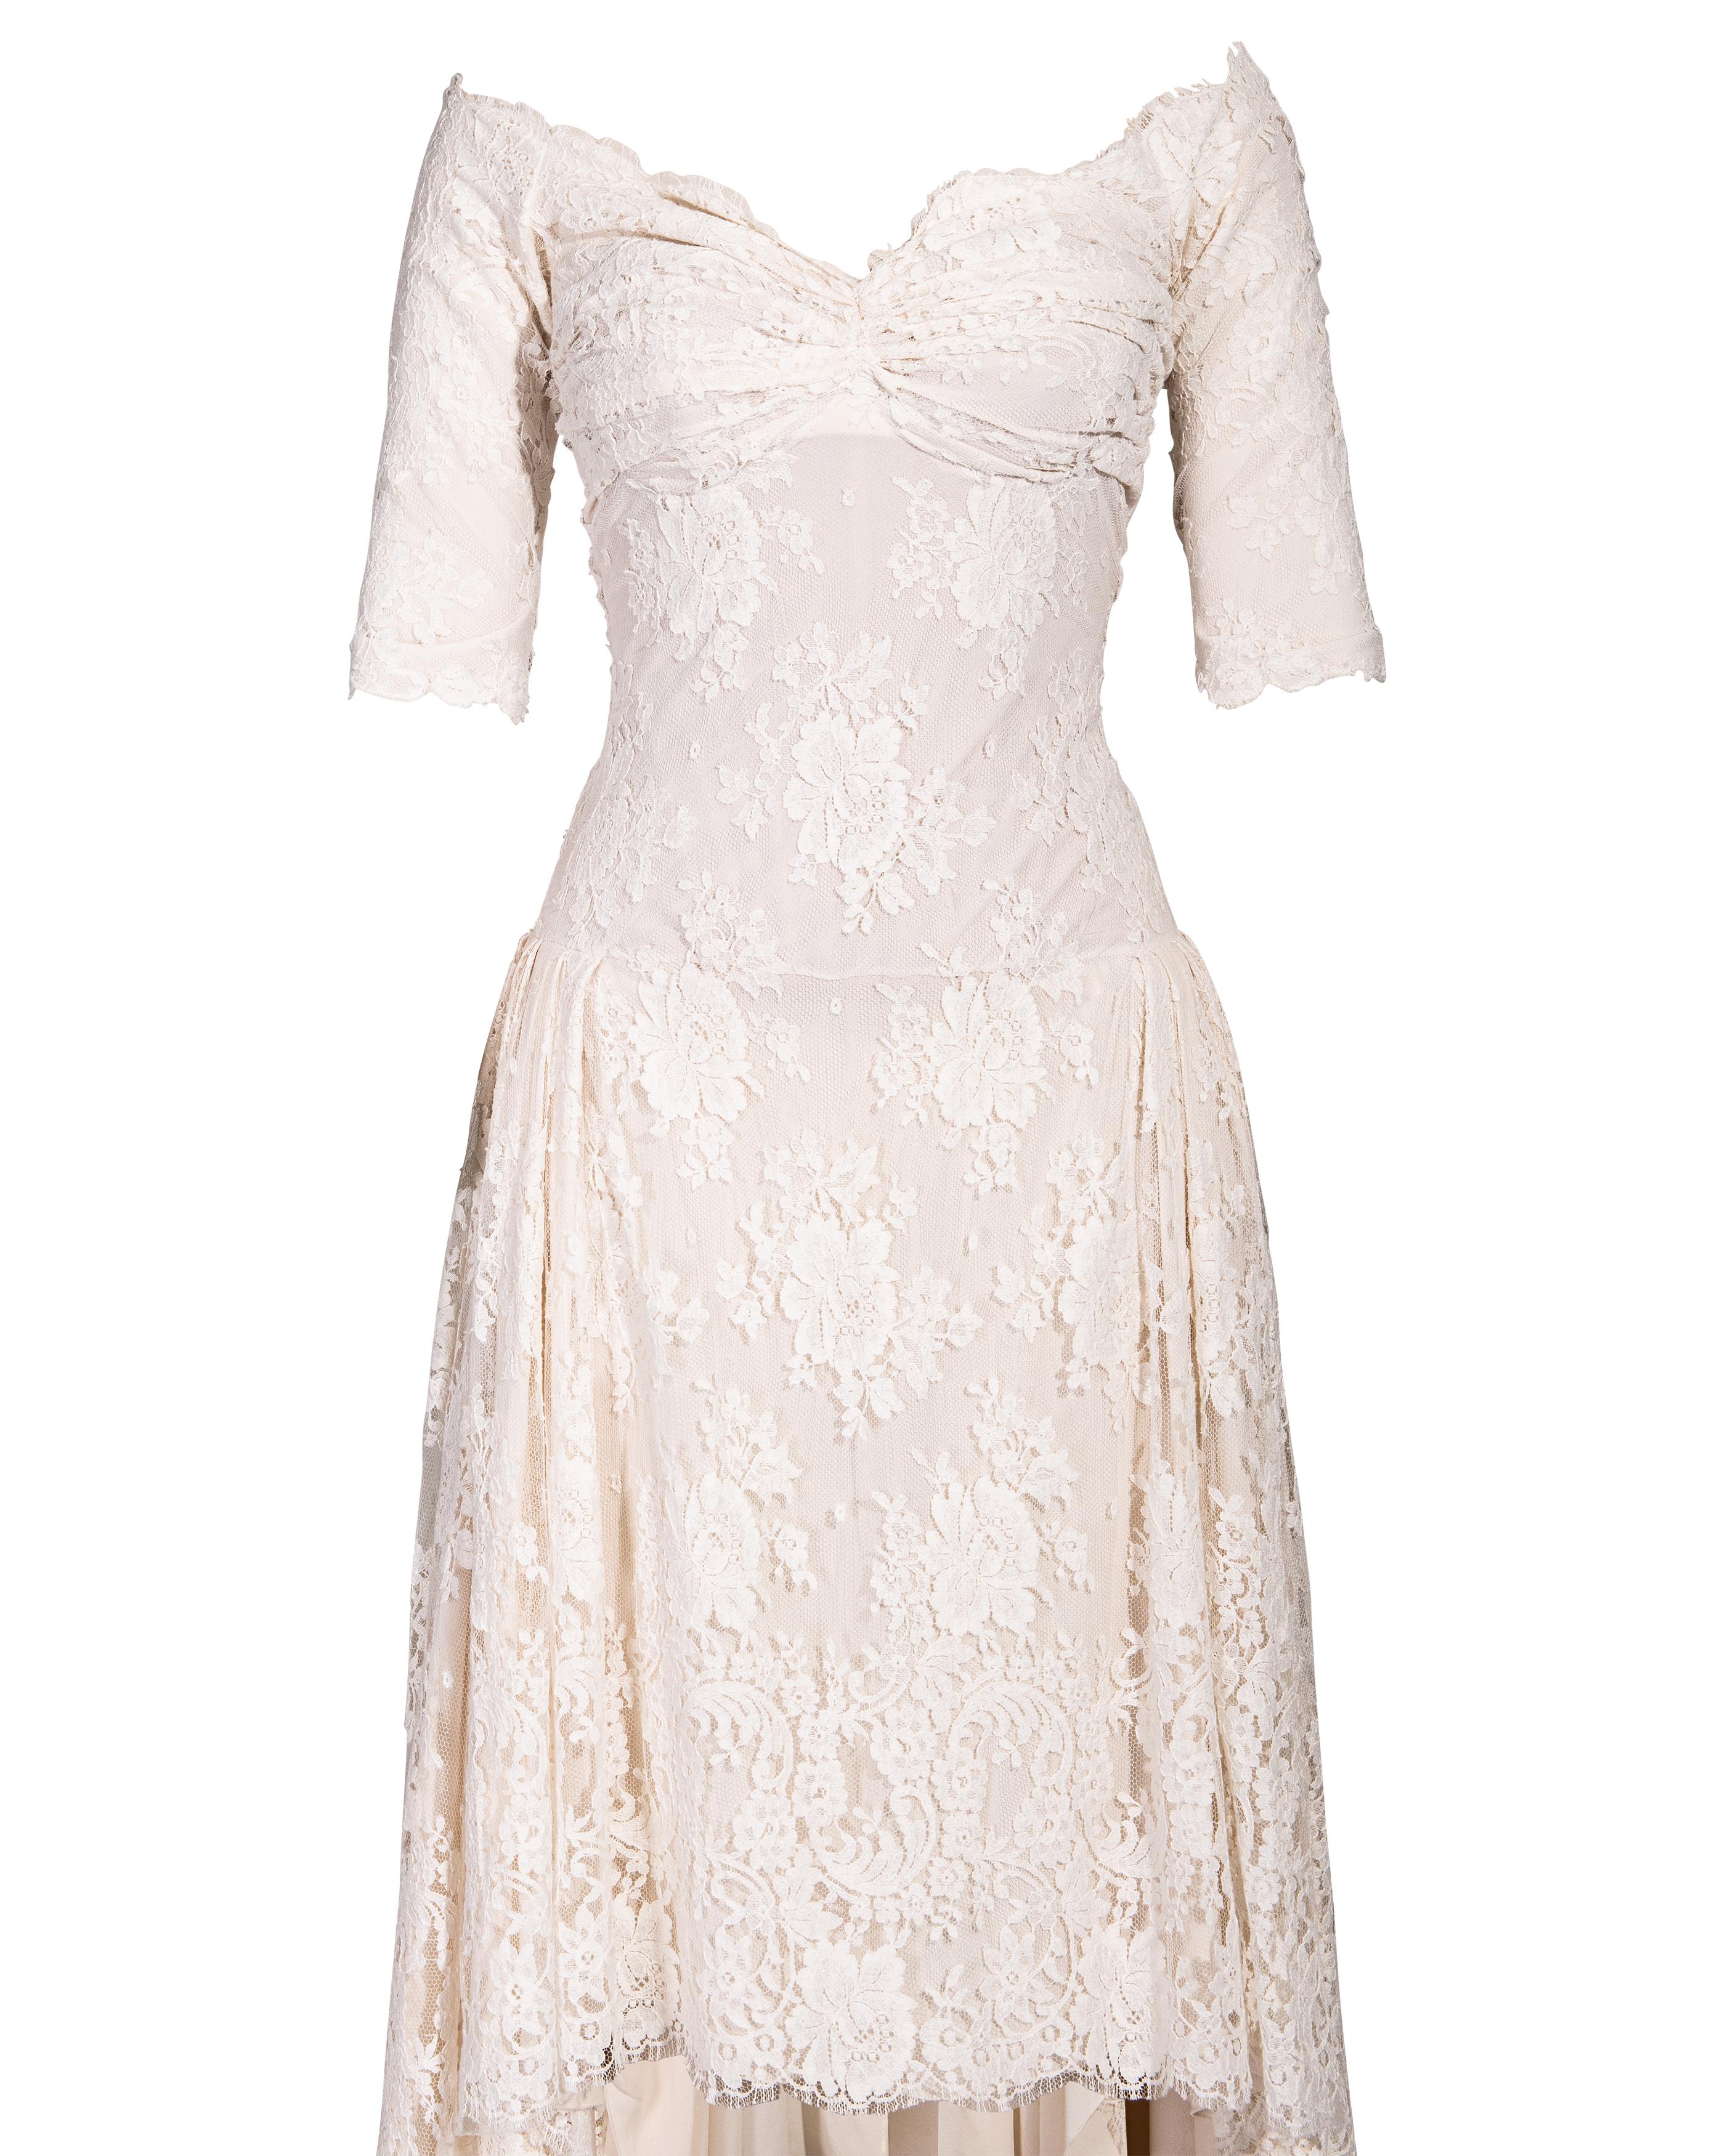 S/S 2007 Alexander McQueen (Lifetime) White Lace Off-Shoulder Gown with Train For Sale 3